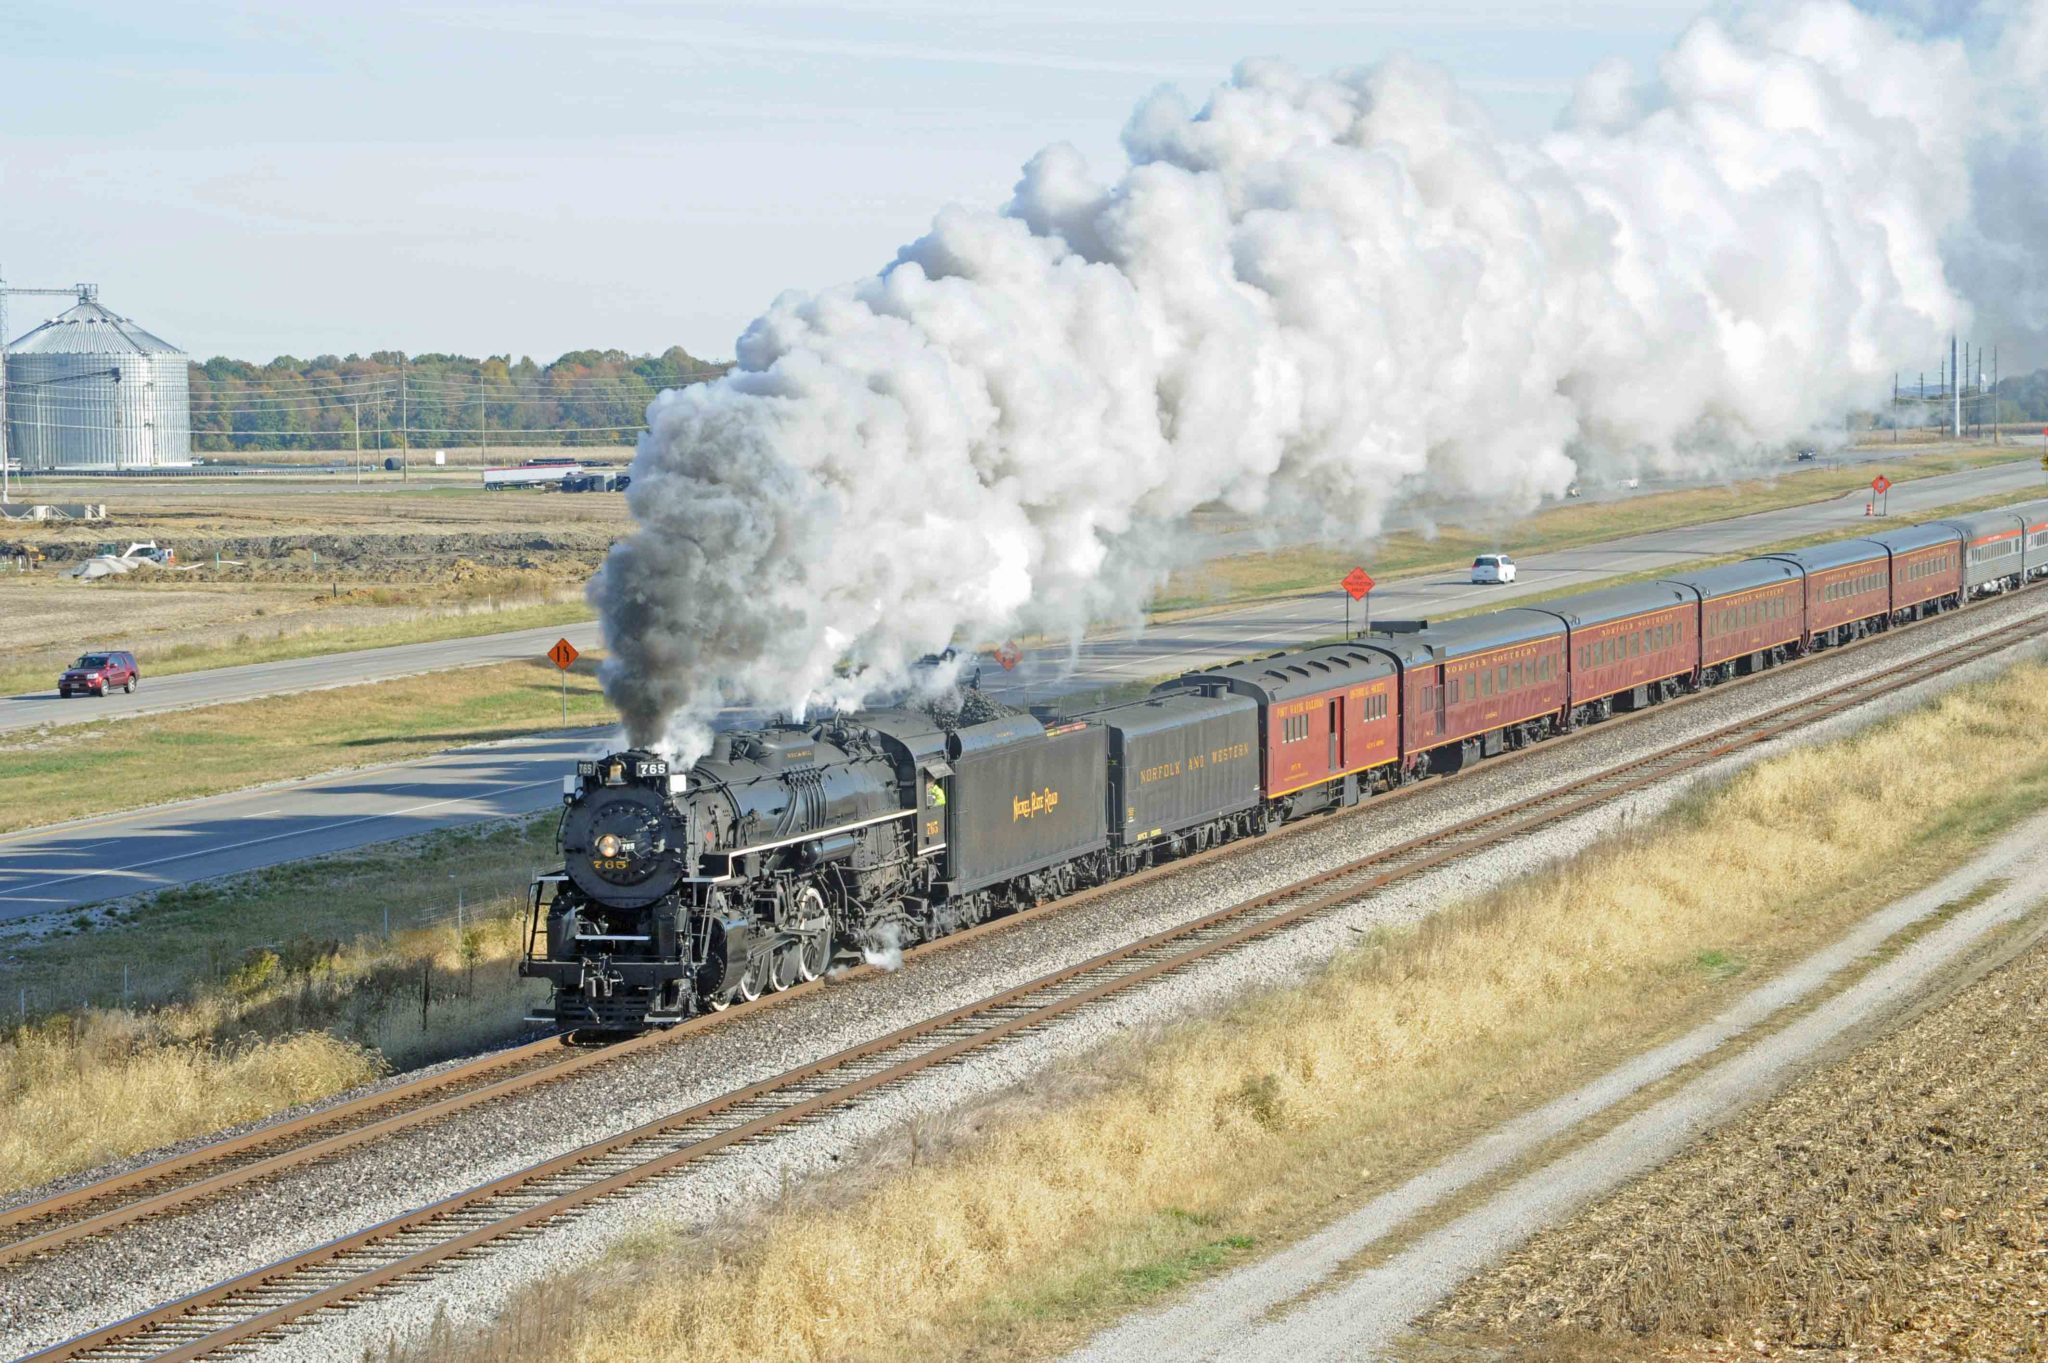 Tickets go on sale Tuesday for Nickel Plate Road 765's only 2019